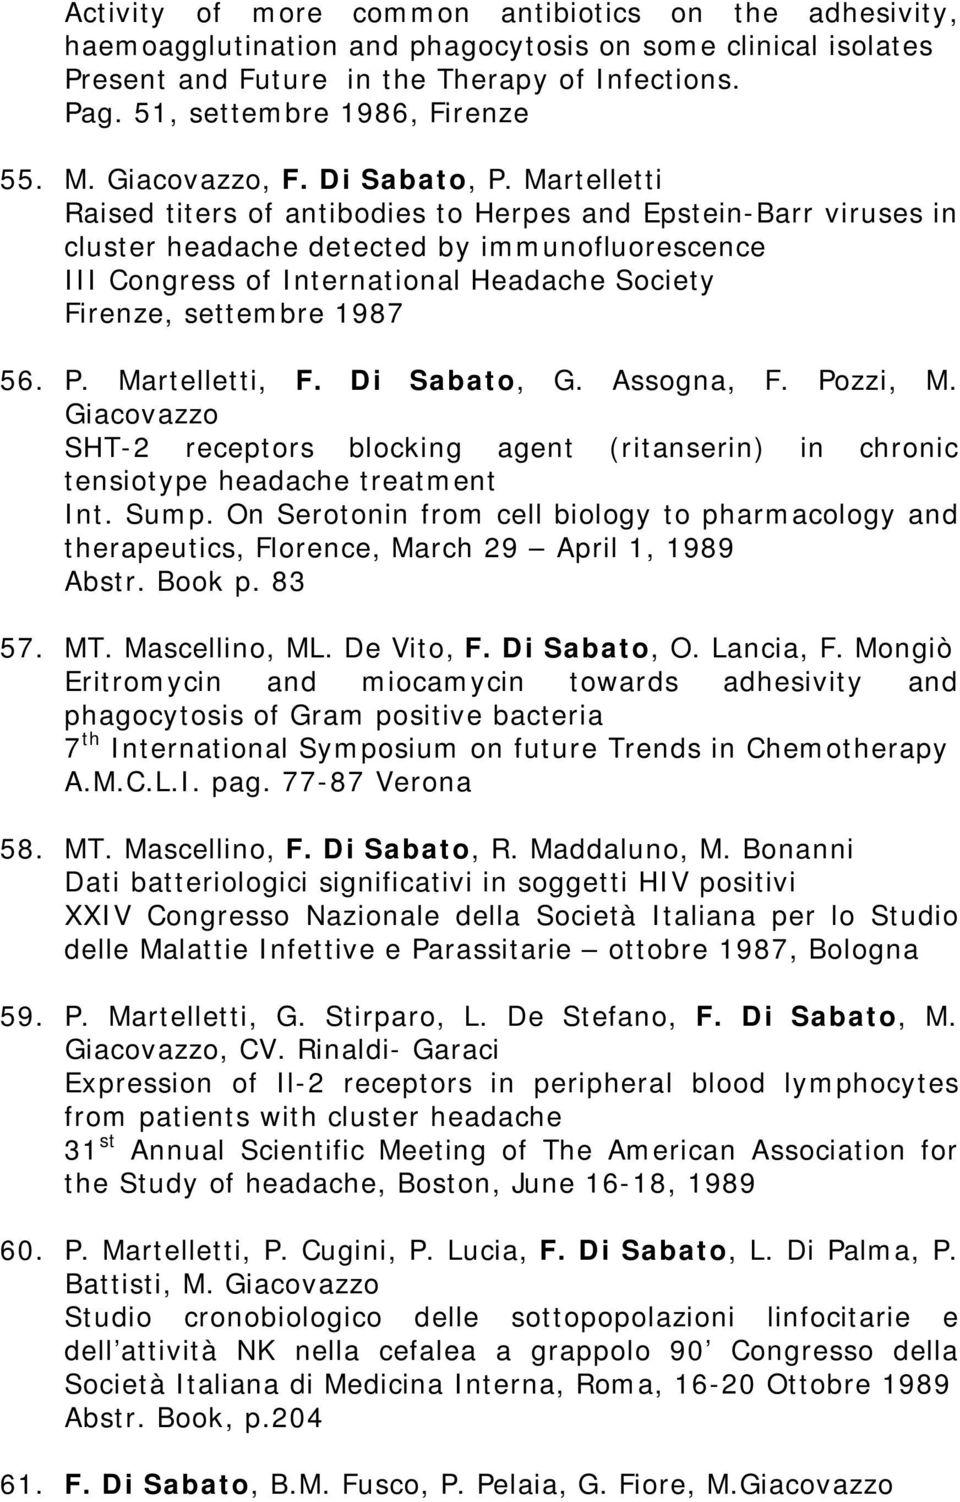 Martelletti Raised titers of antibodies to Herpes and Epstein-Barr viruses in cluster headache detected by immunofluorescence III Congress of International Headache Society Firenze, settembre 1987 56.